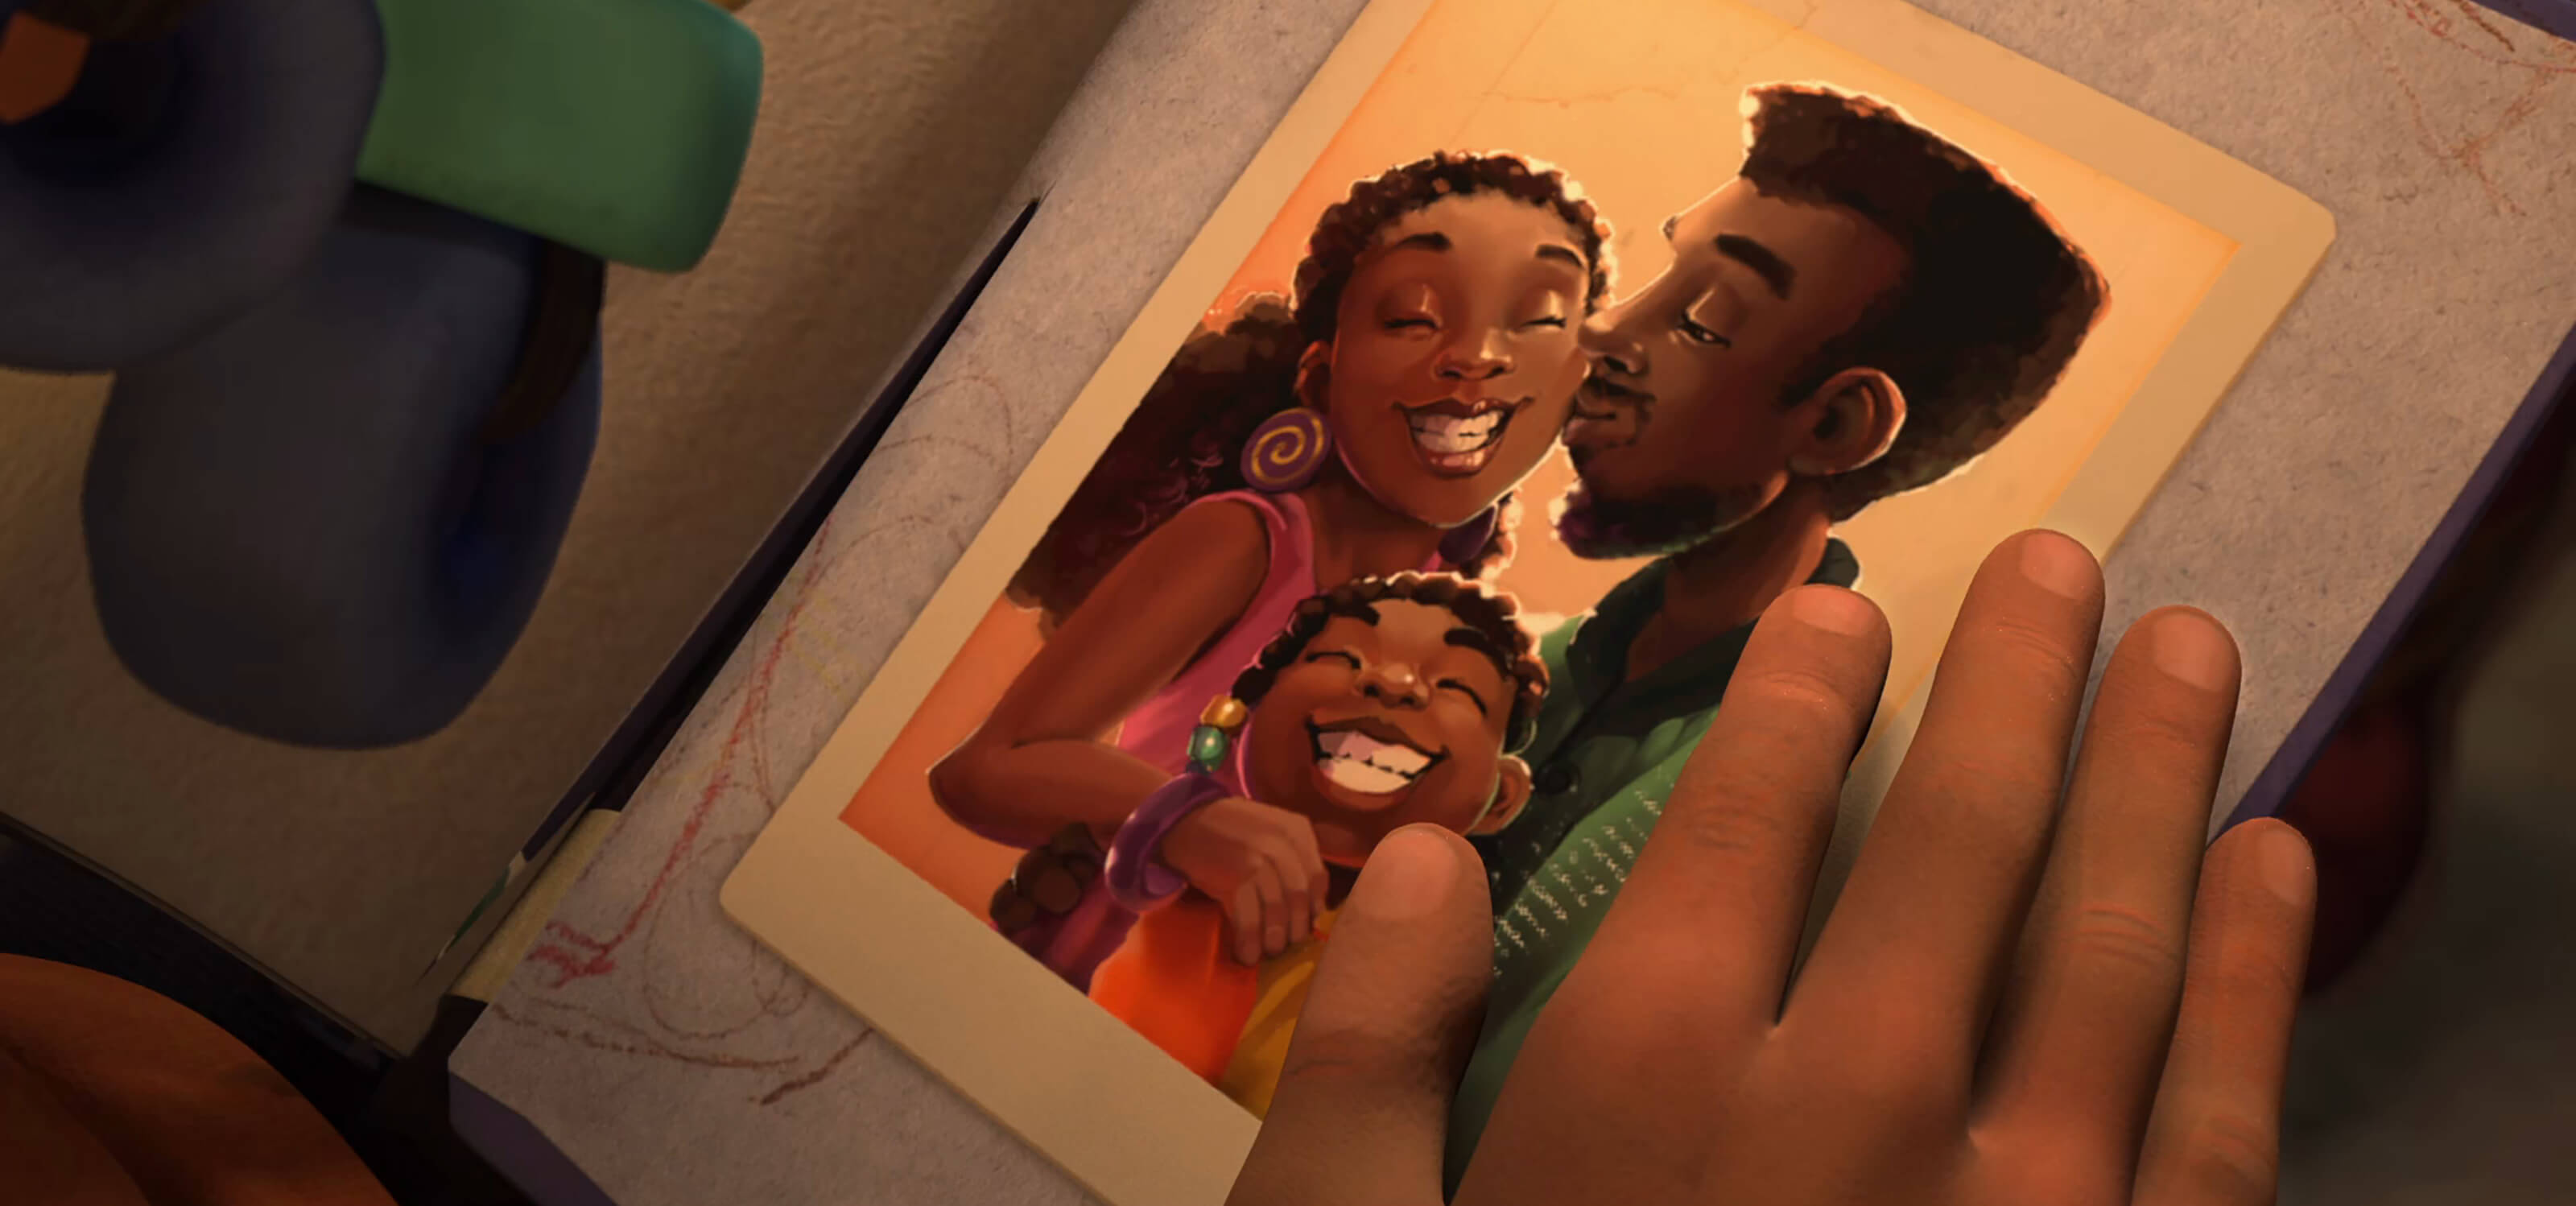 Screen capture from the DigiPen student film Adija. A young girl looks at a happy family photograph.